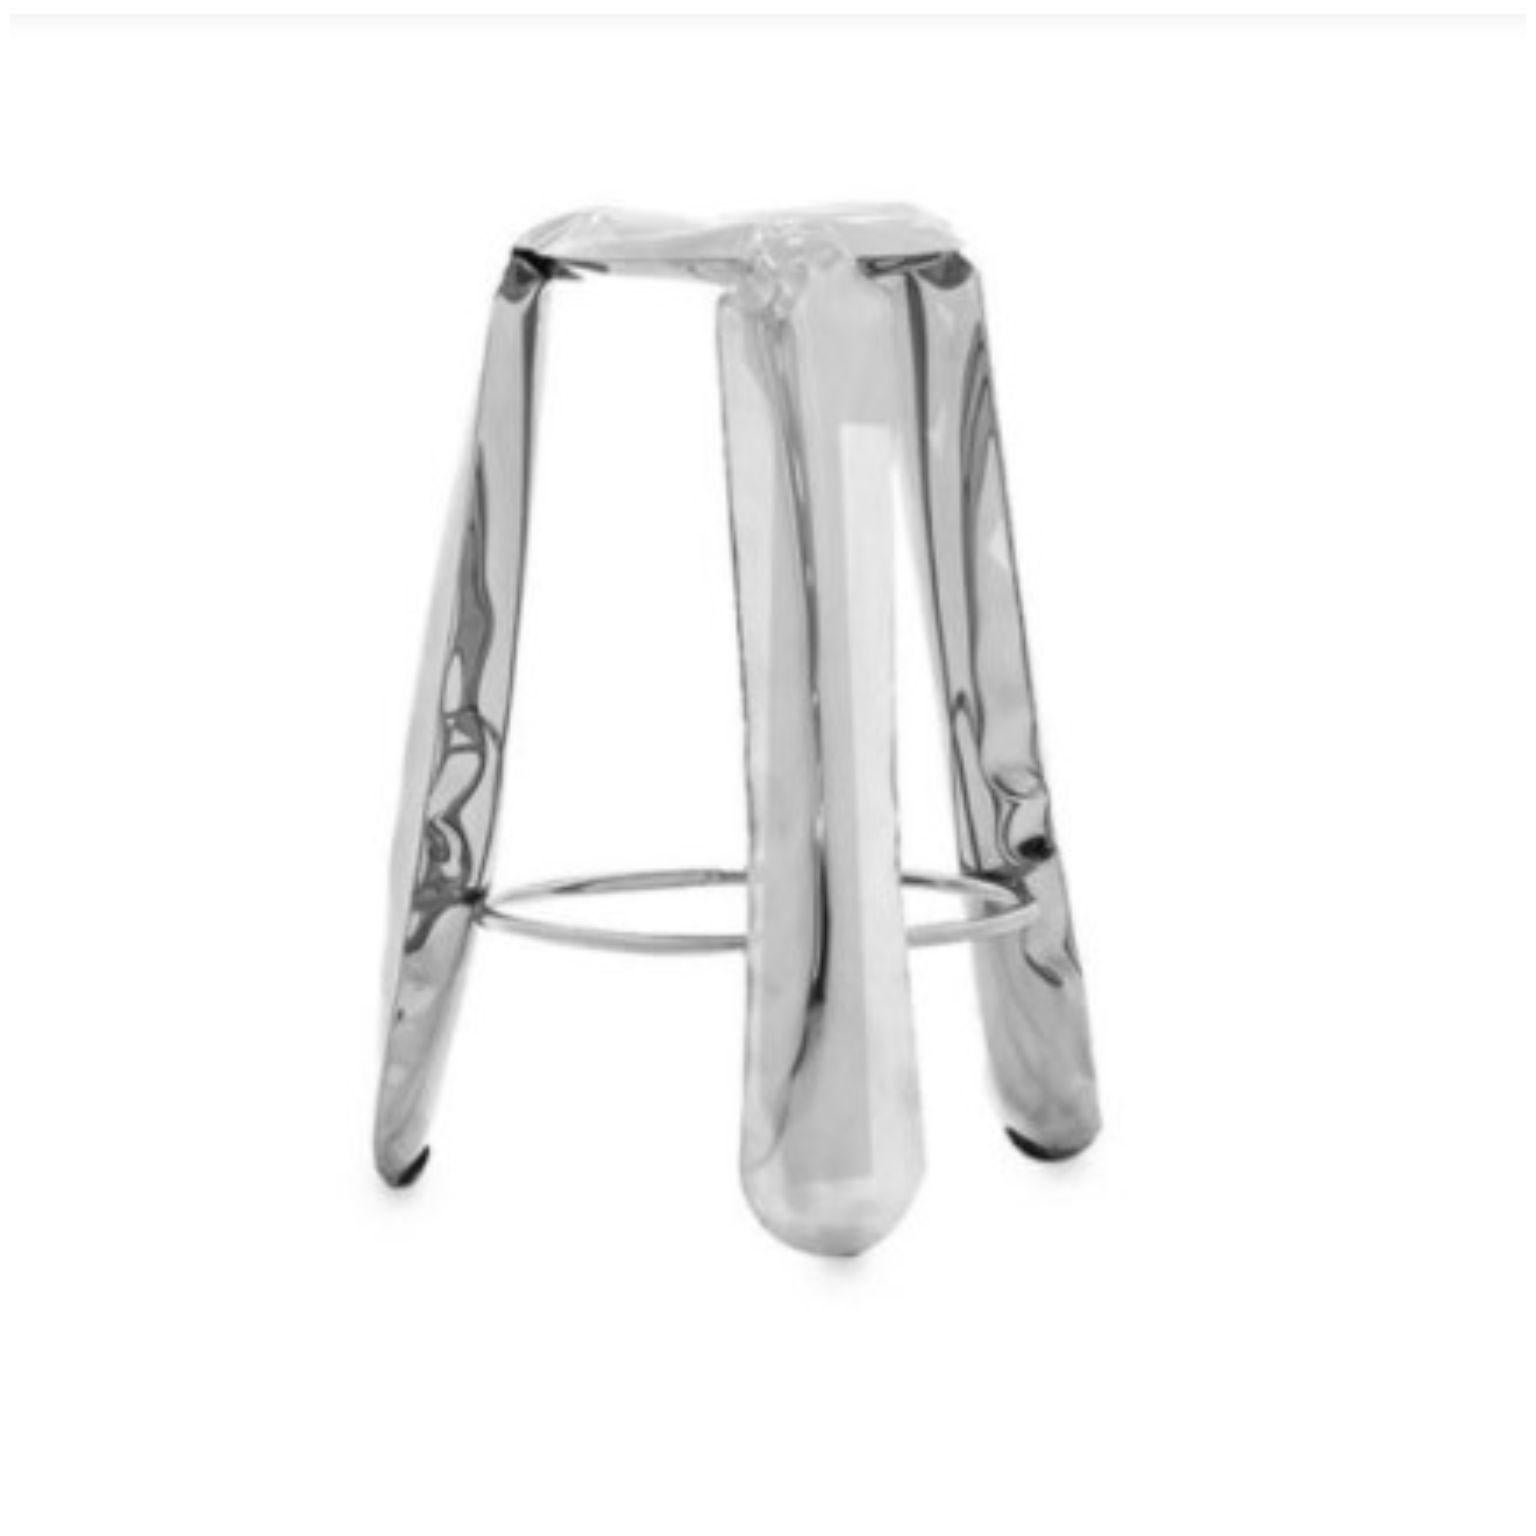 Stainless steel bar Plopp stool by Zieta
Dimensions: D 35 x H 75 cm 
Material: Stainless Steel.
Finish: Polished.
Available in colors: Beige, black, white, blue, graphite, moss, umbra gray, flaming gold, and cosmic blue. Available in Stainless